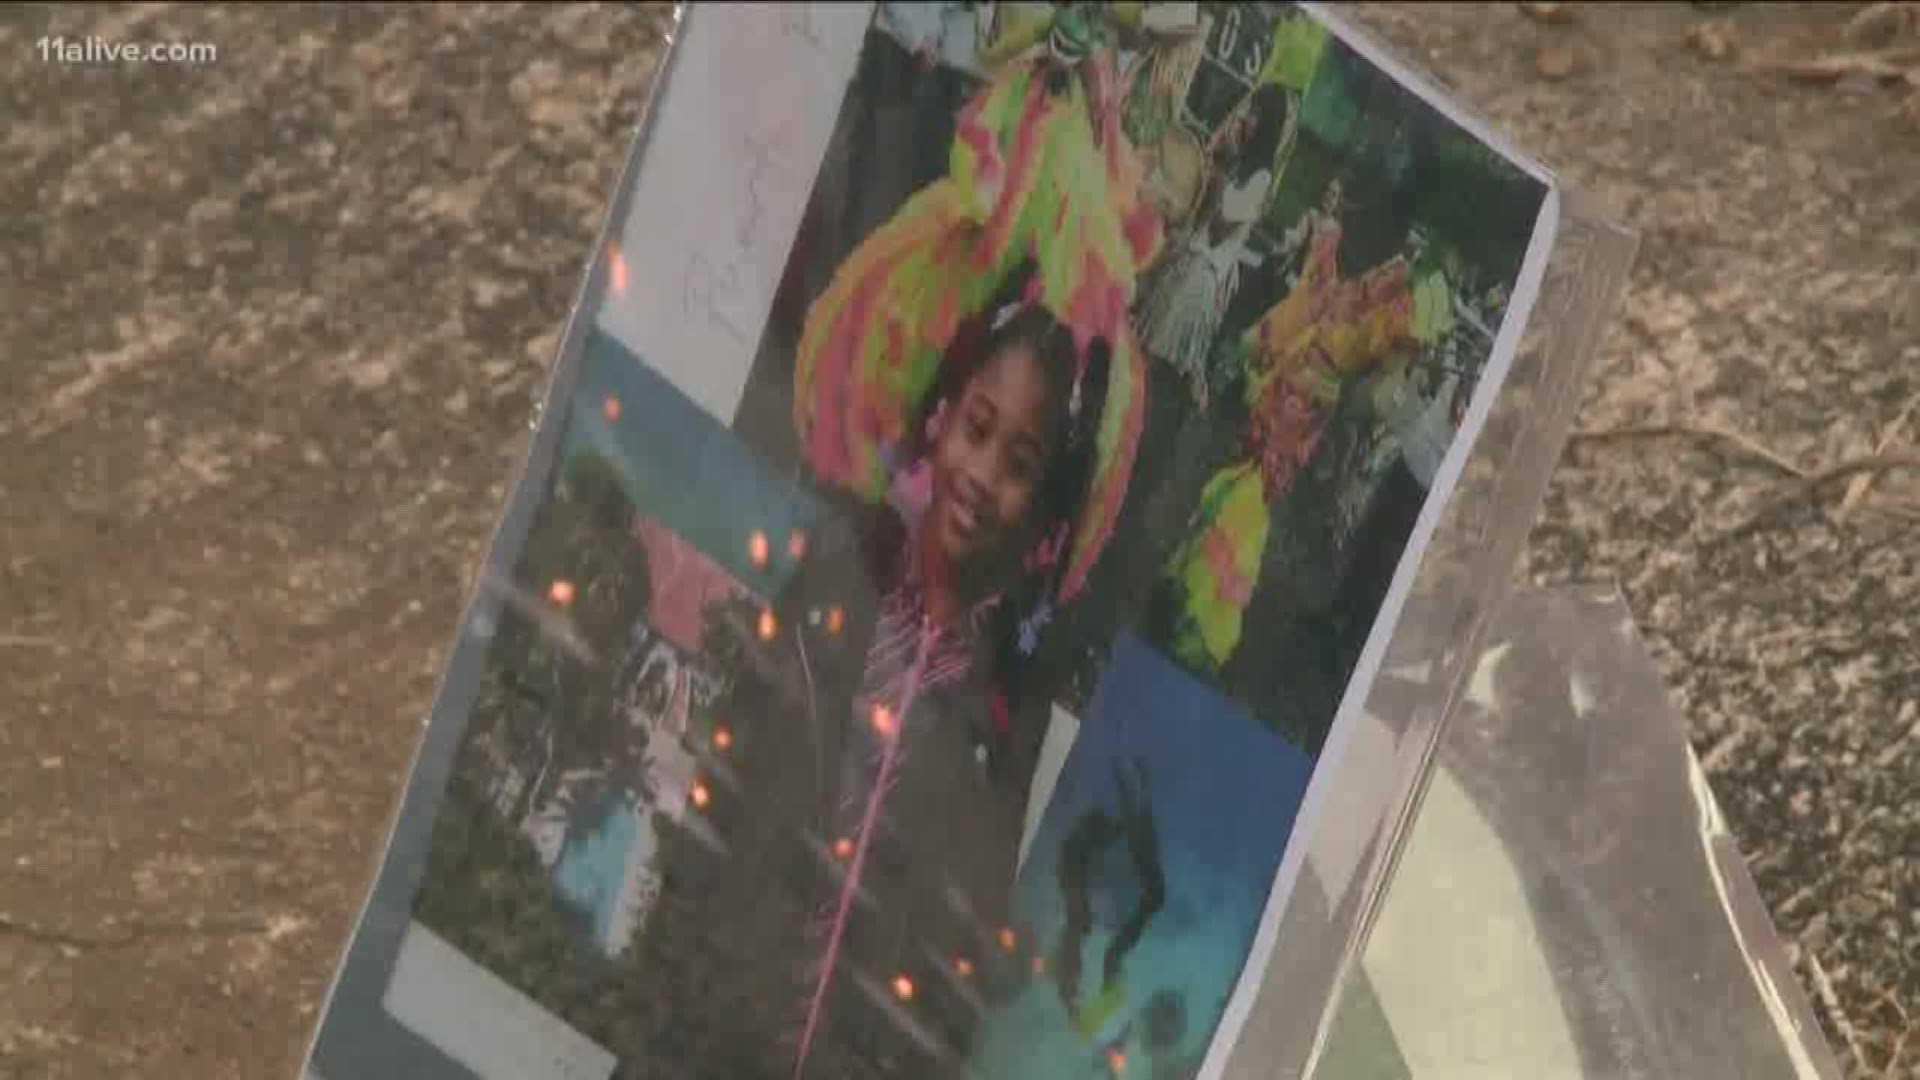 A vigil was held to honor the 7-year-old who died after her foster parents' home was hit by bullets.